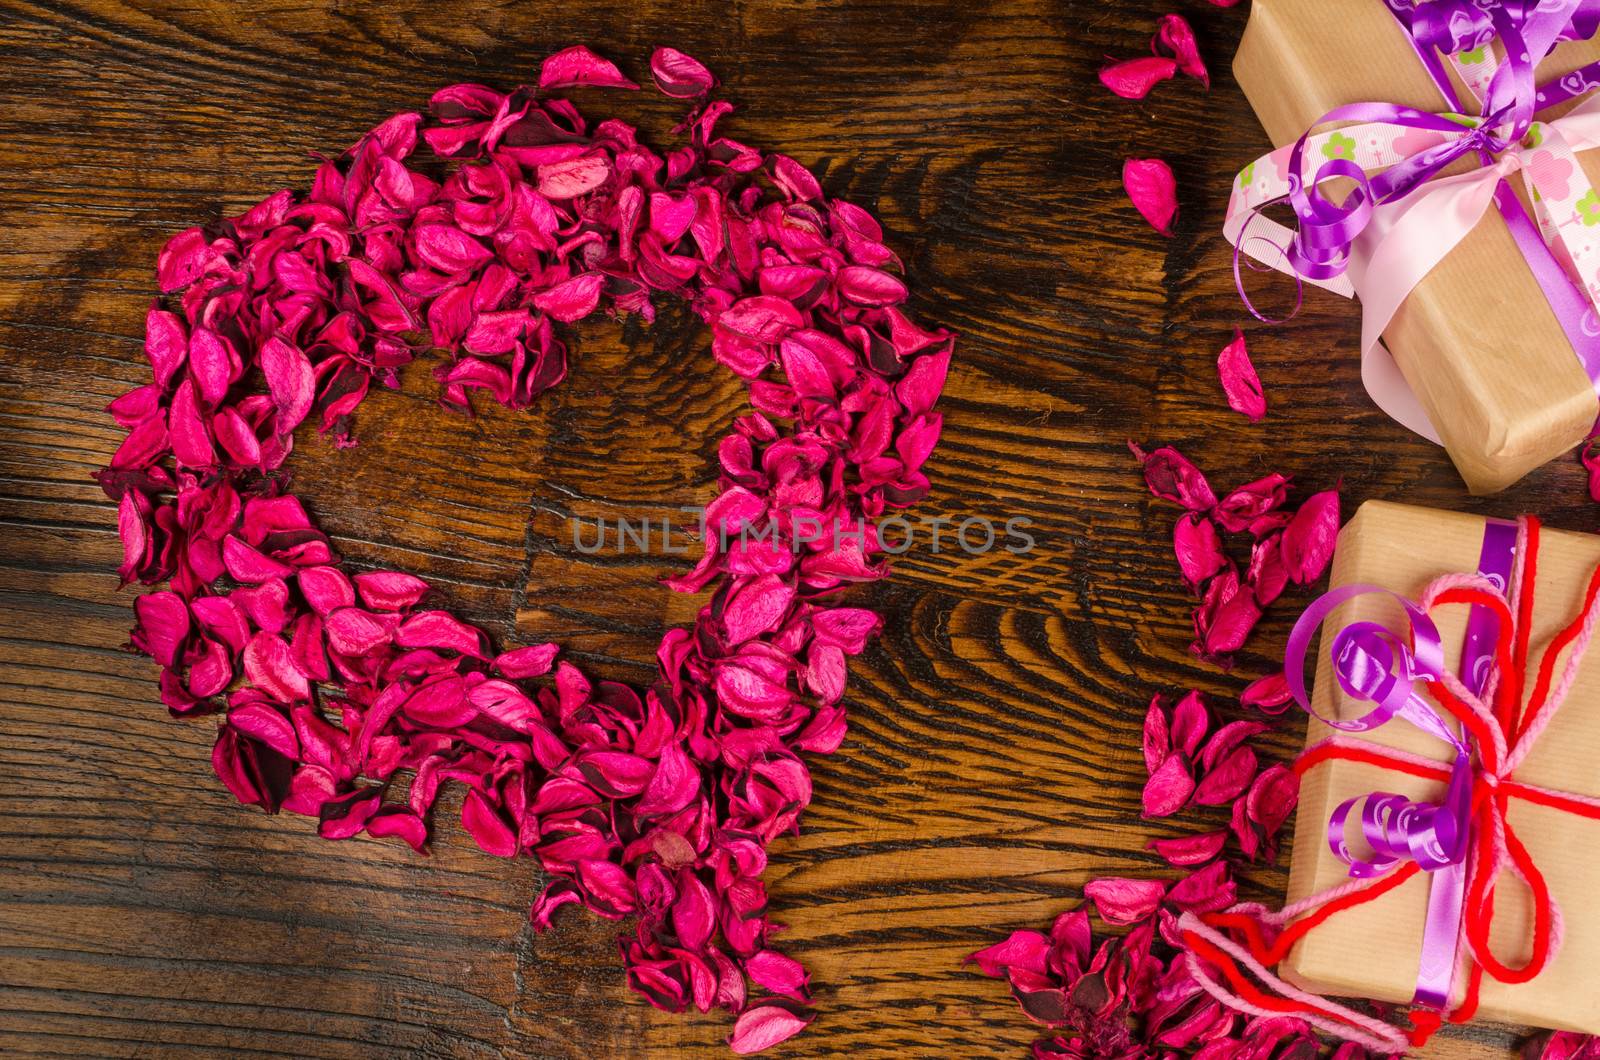 Floral Valentinte heart next to fancy gift boxes